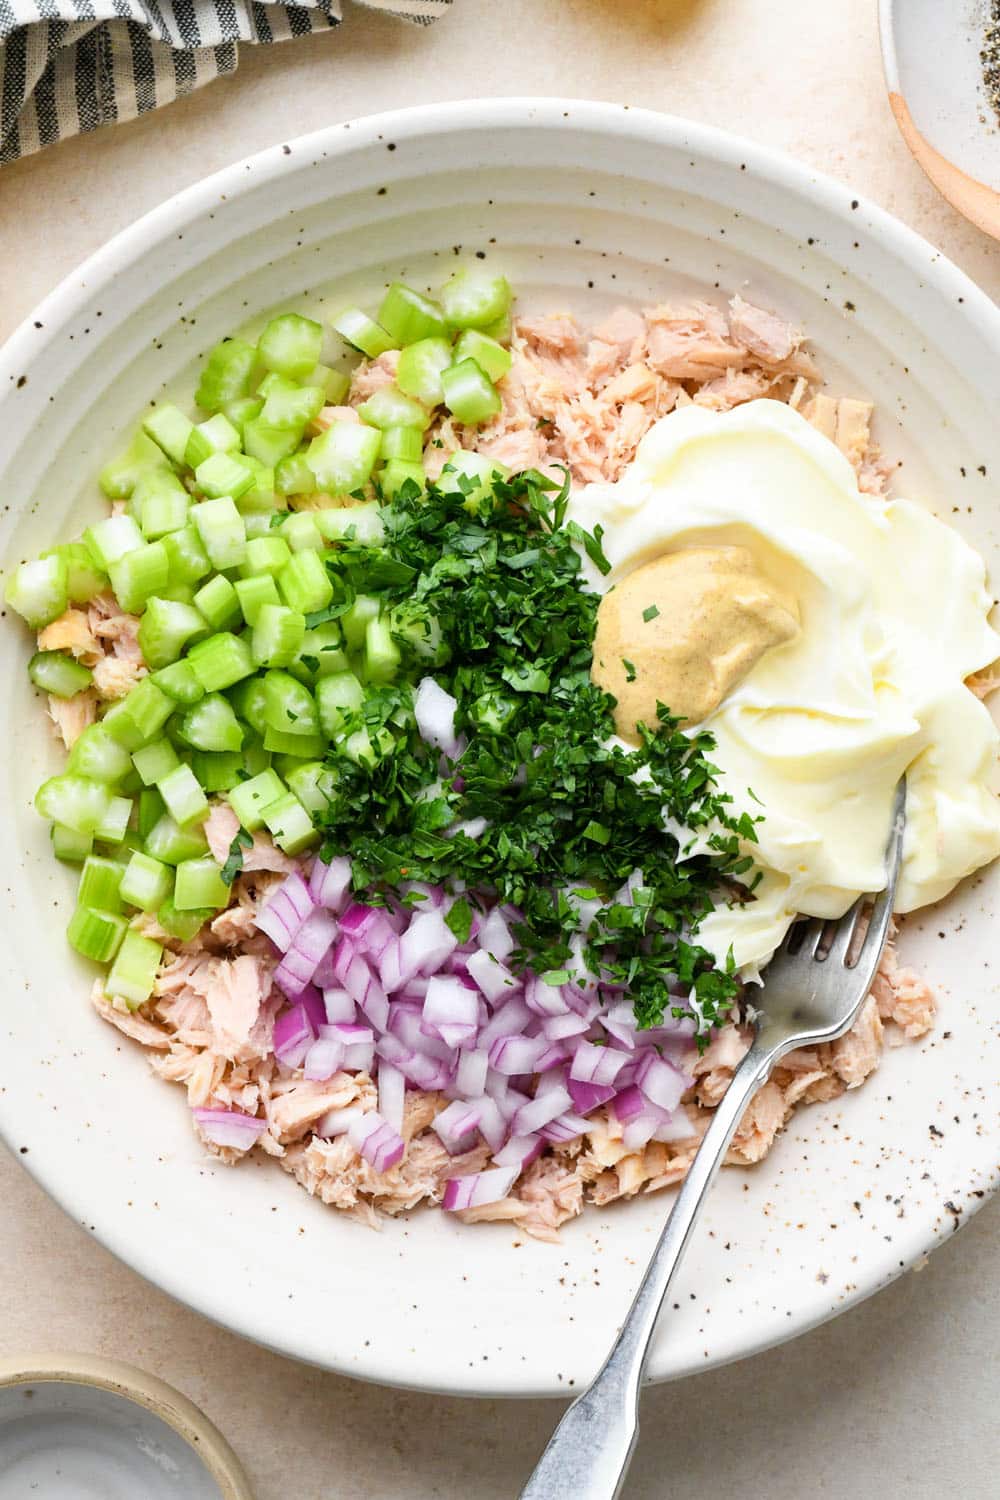 How to make tuna salad: Flaked tuna in a large bowl with diced celery, red onion, parsley, mayonnaise, and dijon mustard.